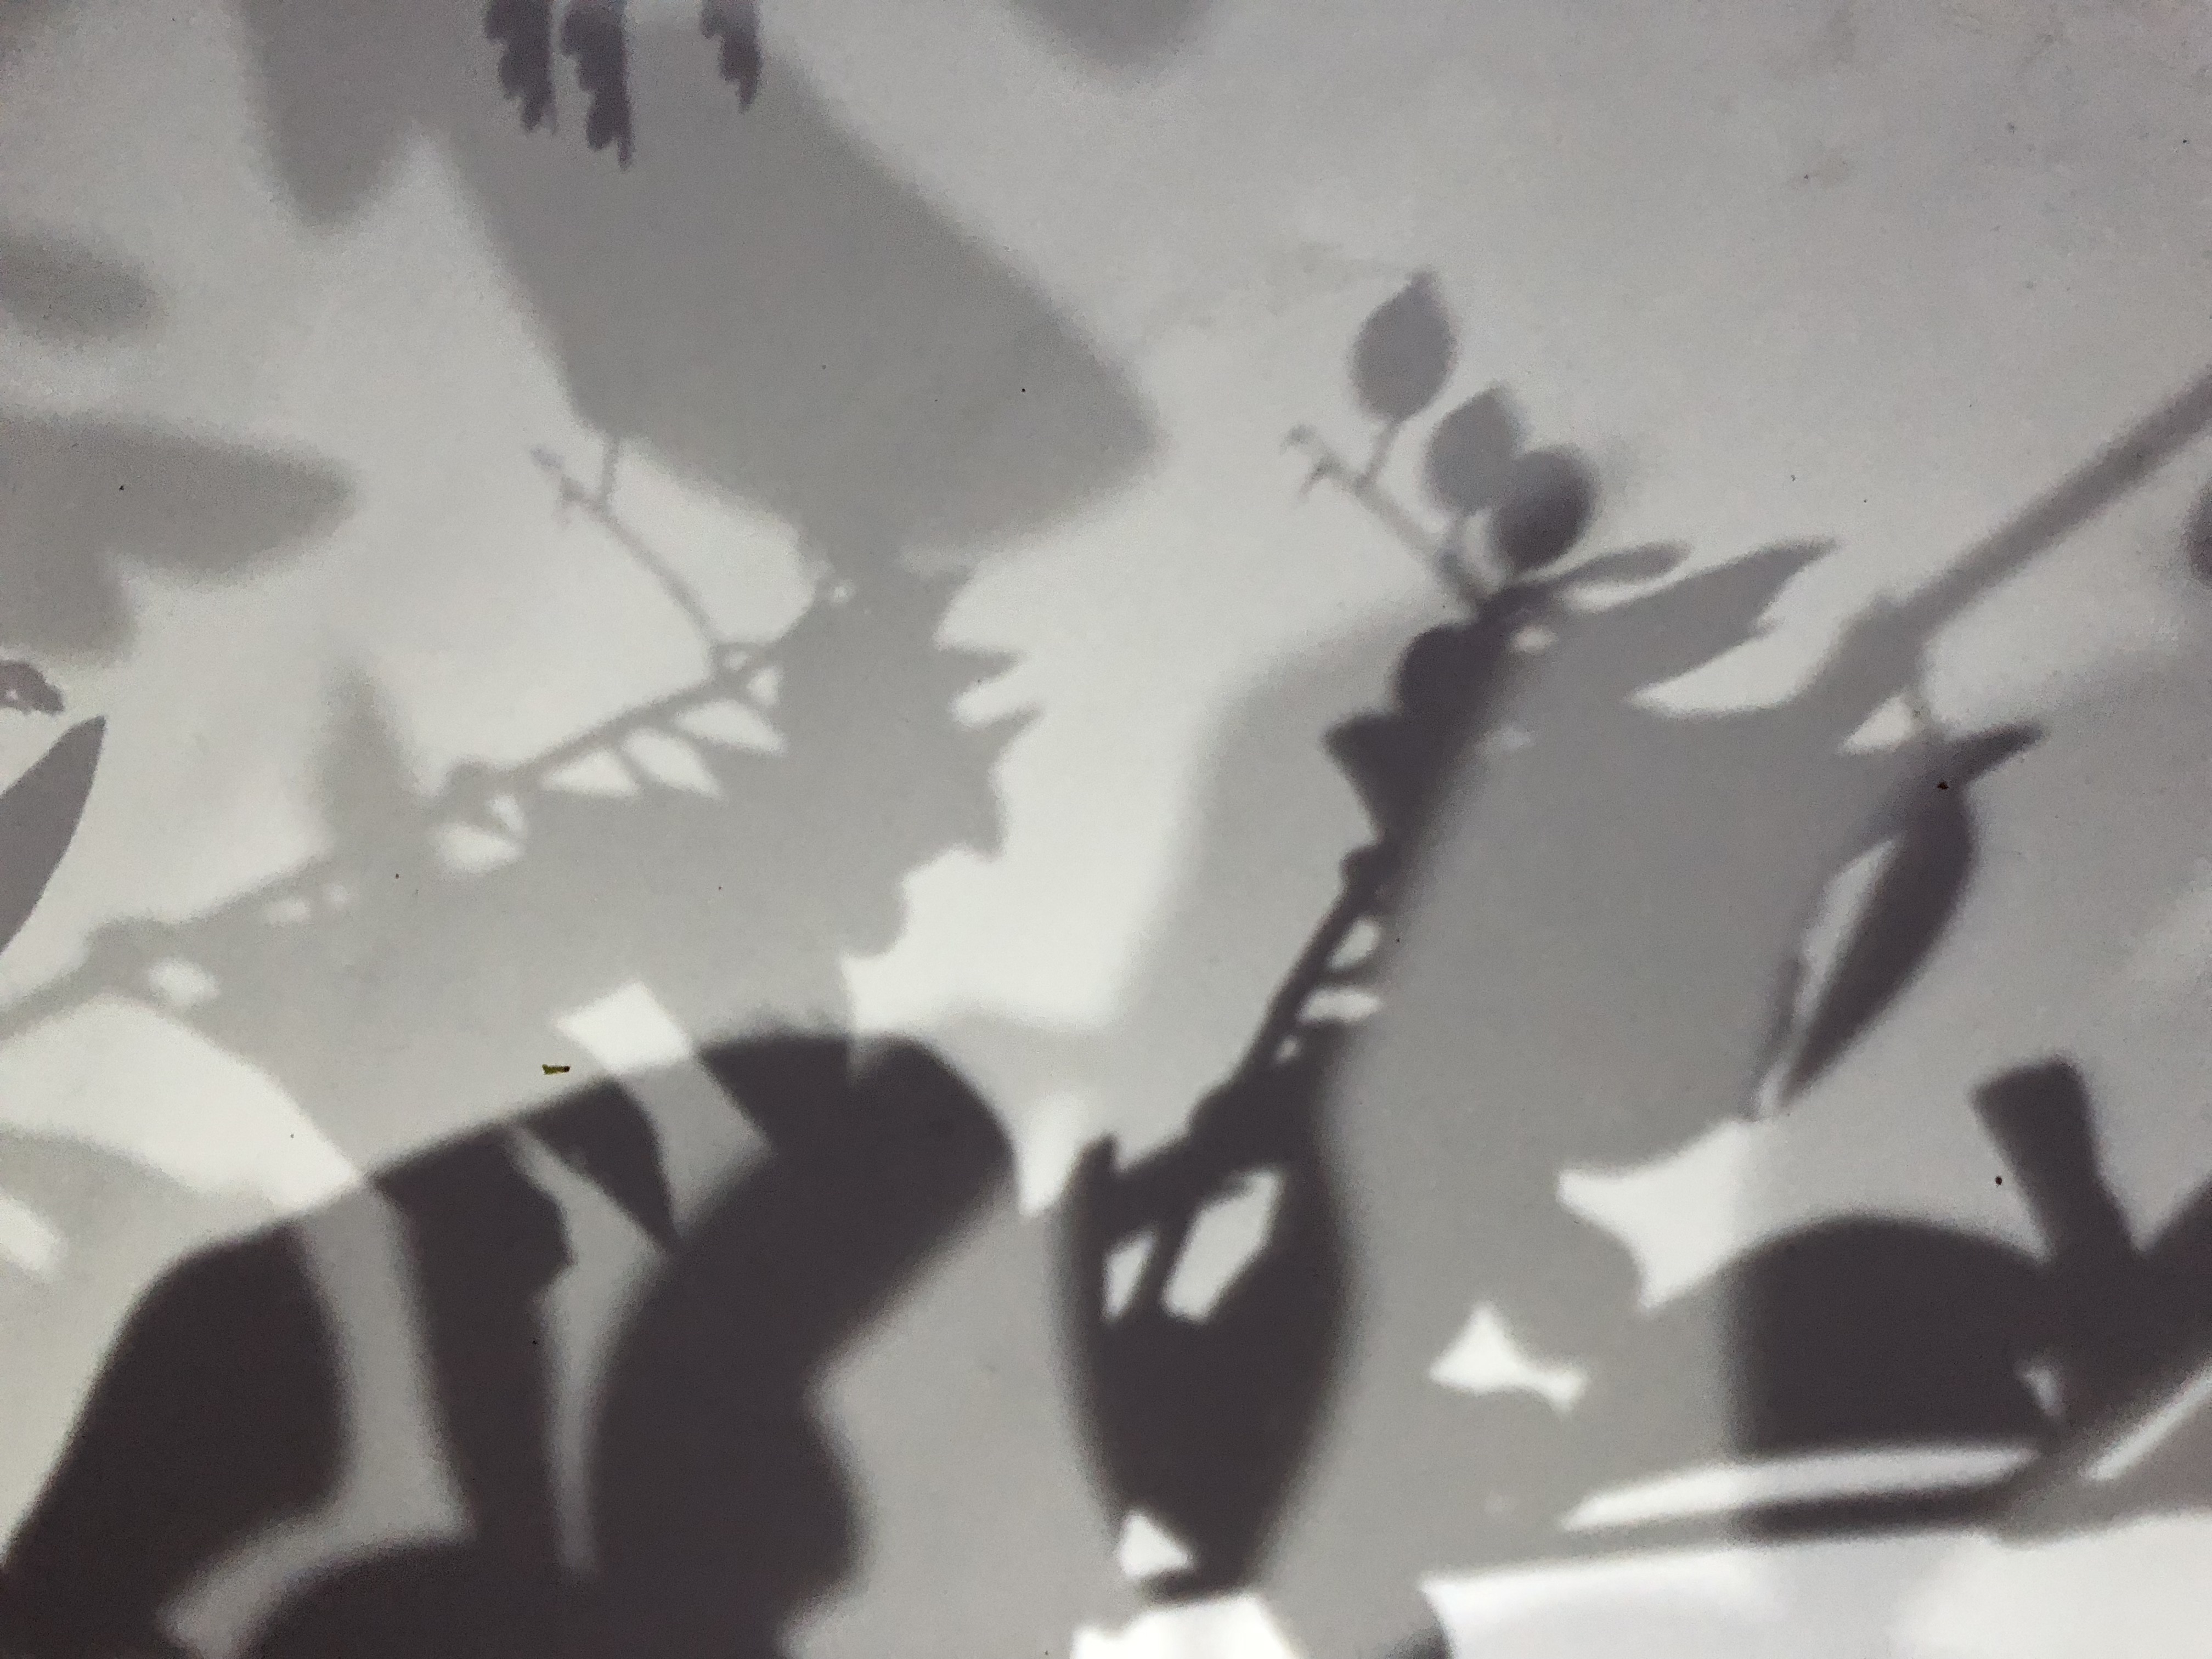 iphones to create photography with shadows